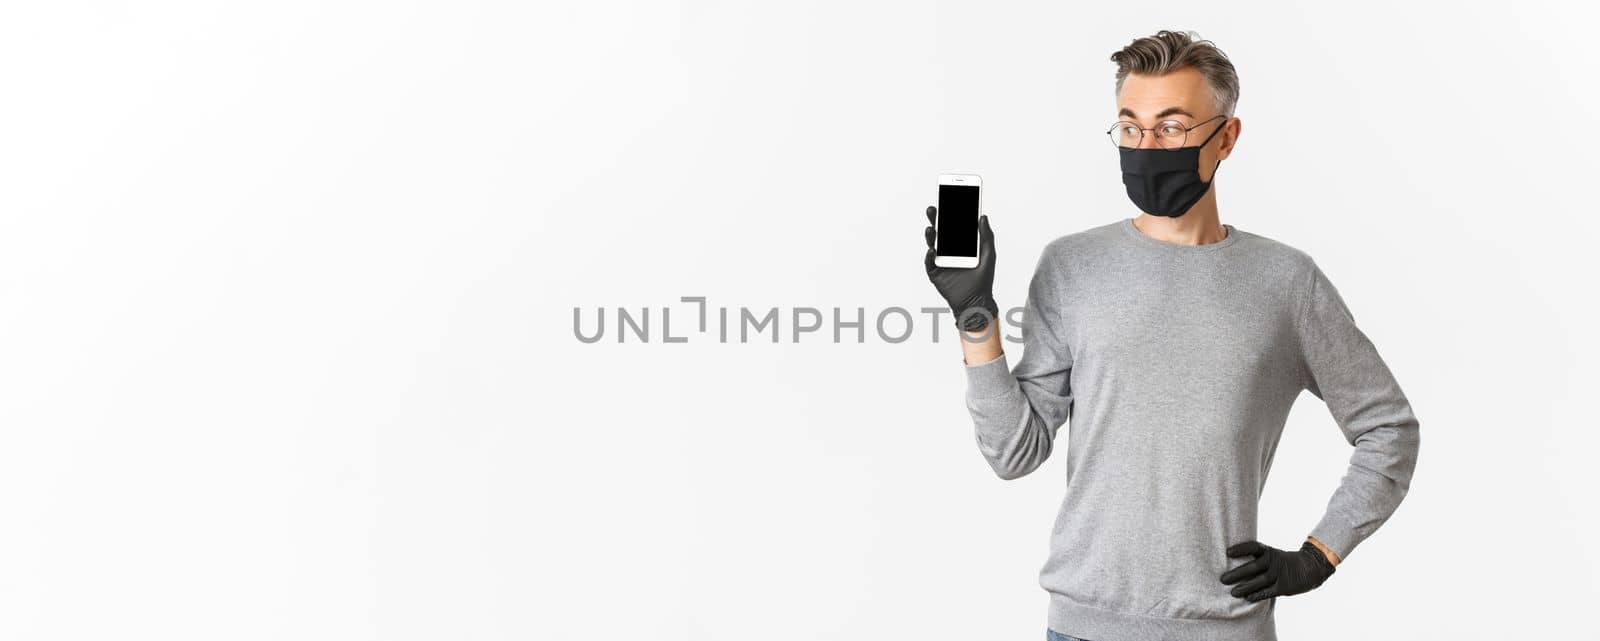 Concept of covid-19, social distancing and lifestyle. Portrait of handsome middle-aged man in medical mask, gloves and glasses, showing mobile phone screen, standing over white background.